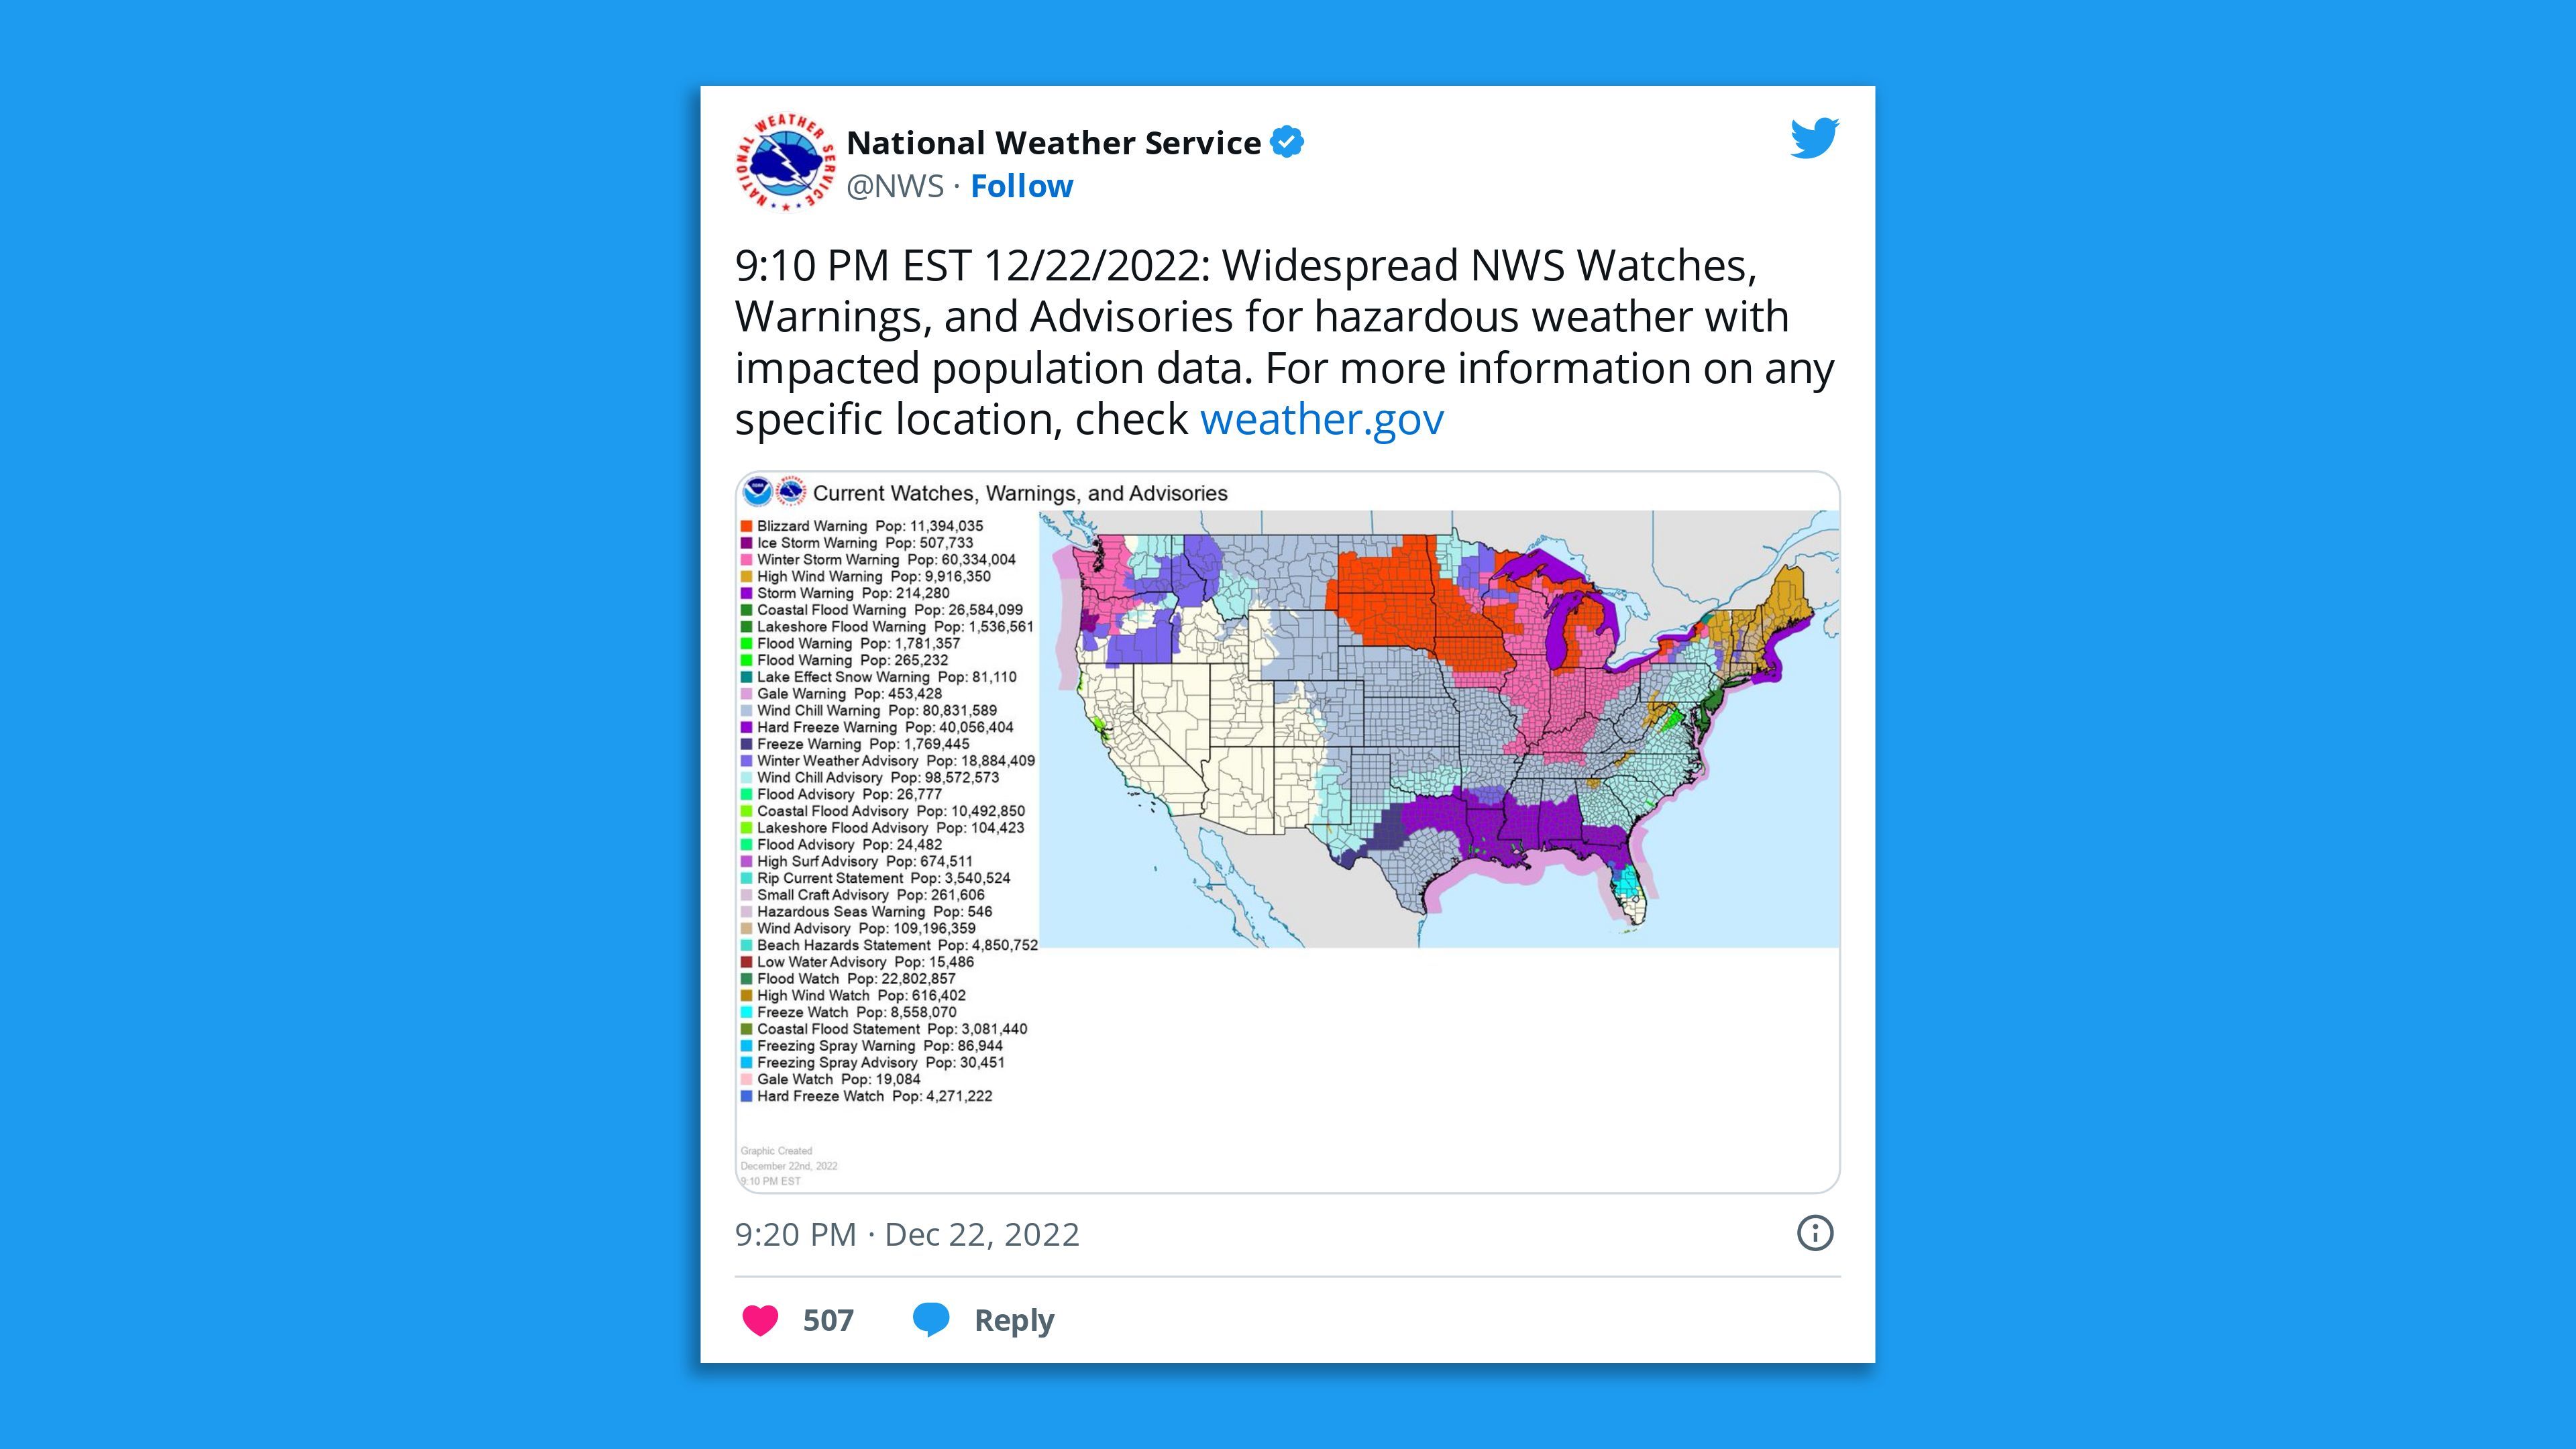 A screenshot of an NWS tweet showing over 200 million people under extreme winter weather alerts across the U.S.